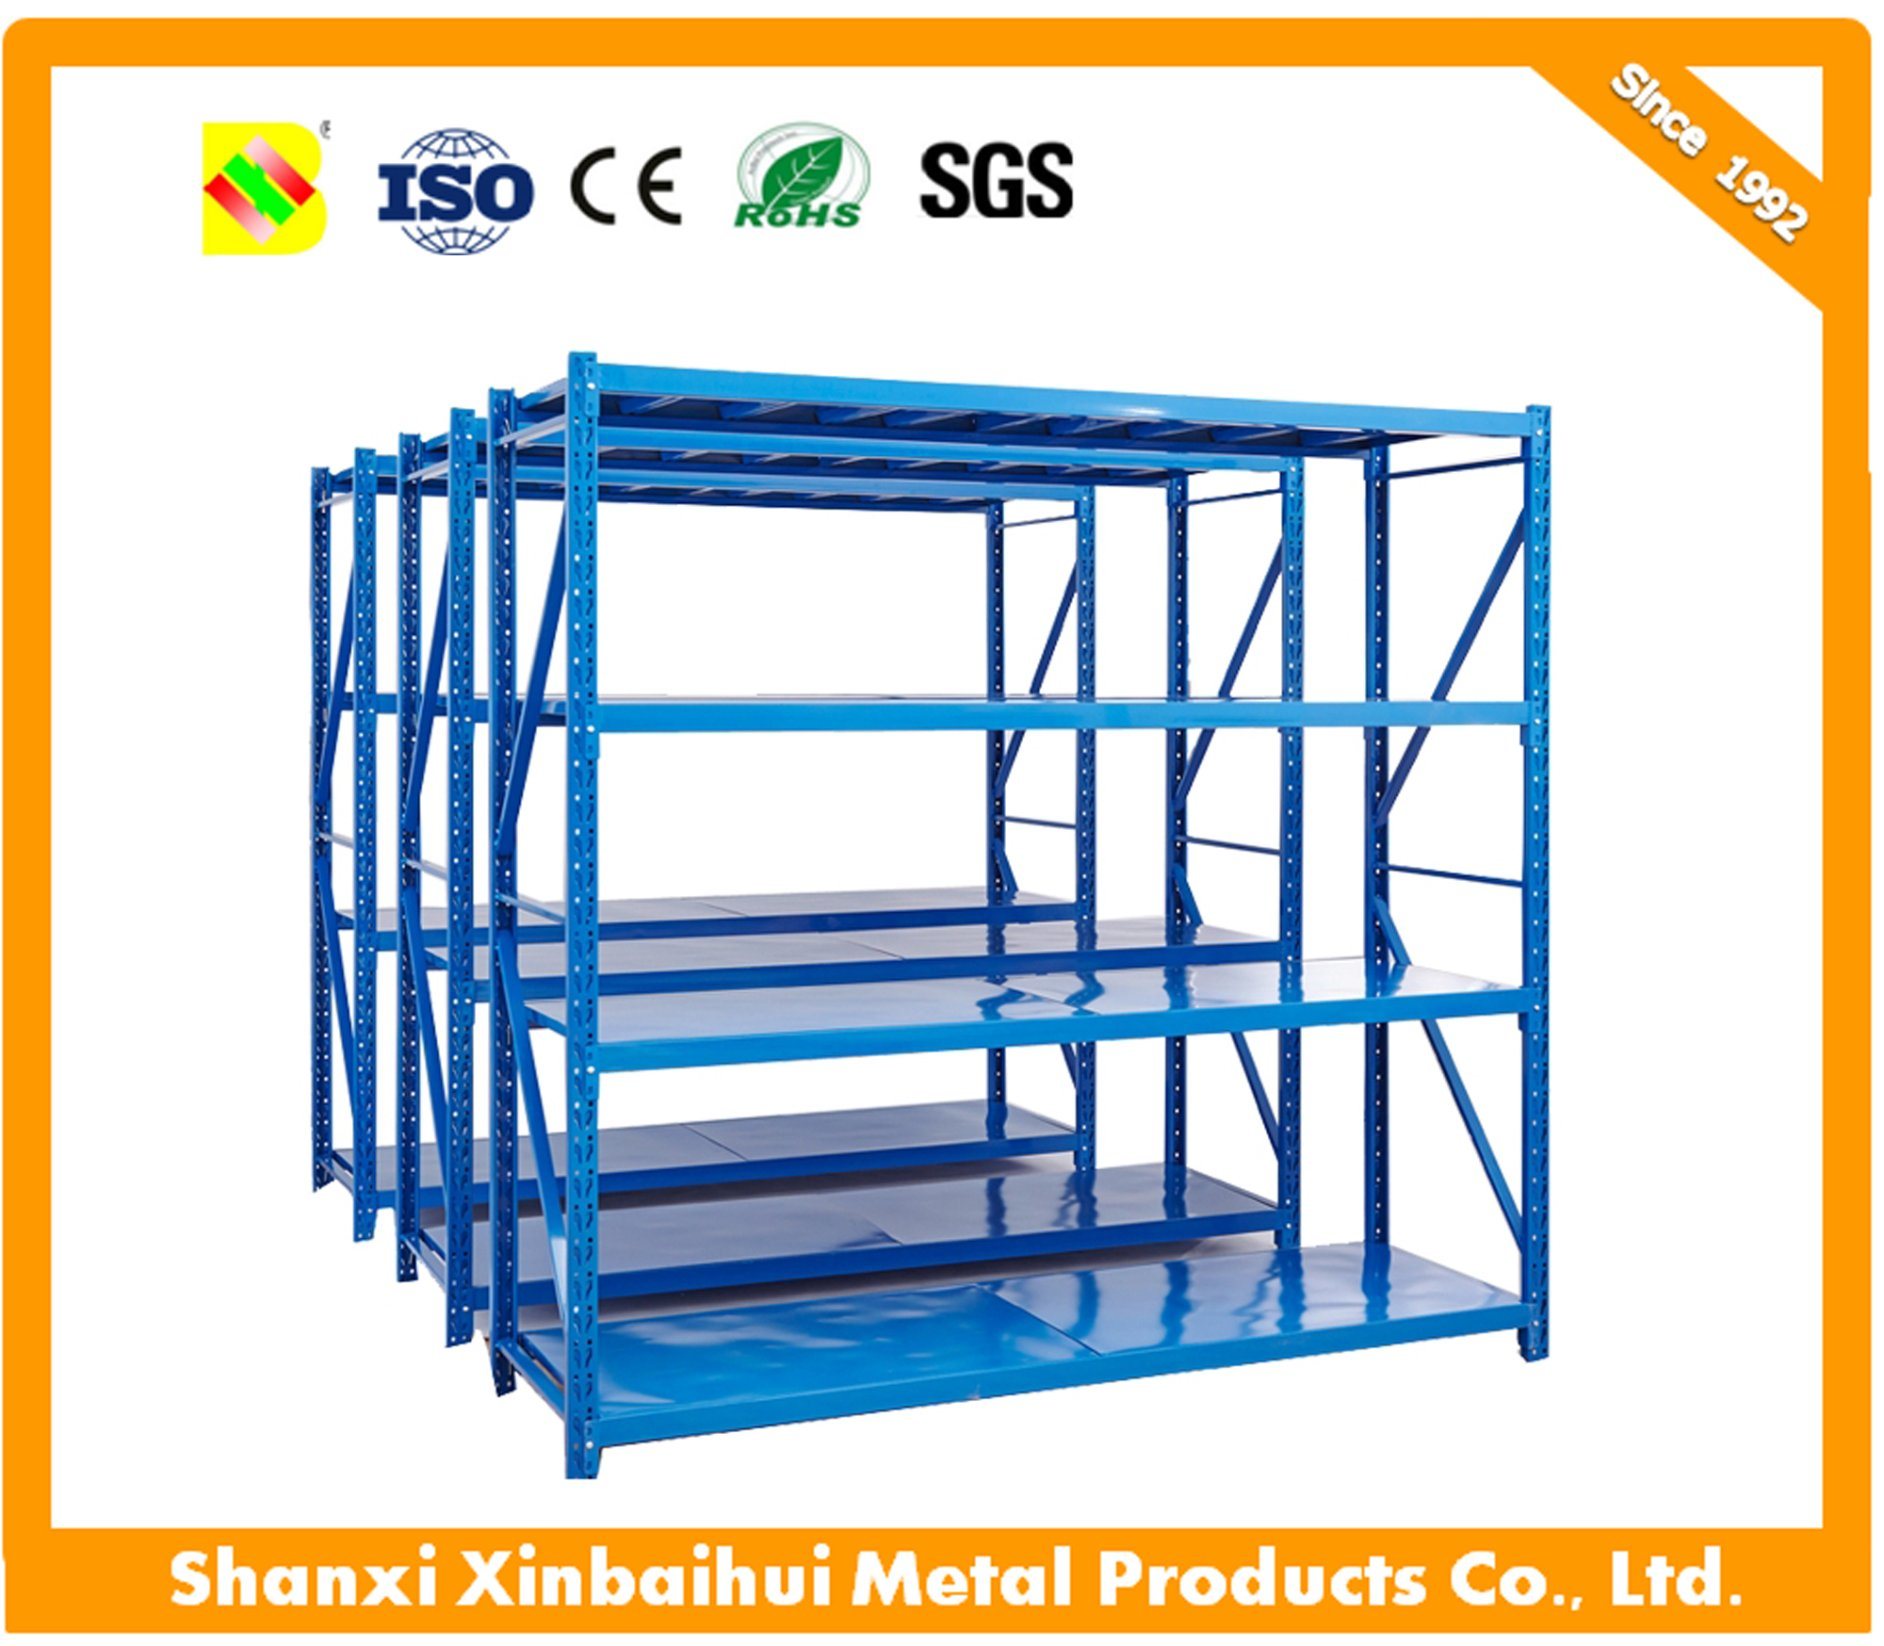 China Supplies Light Duty Storage Racks and Shelves for Sale